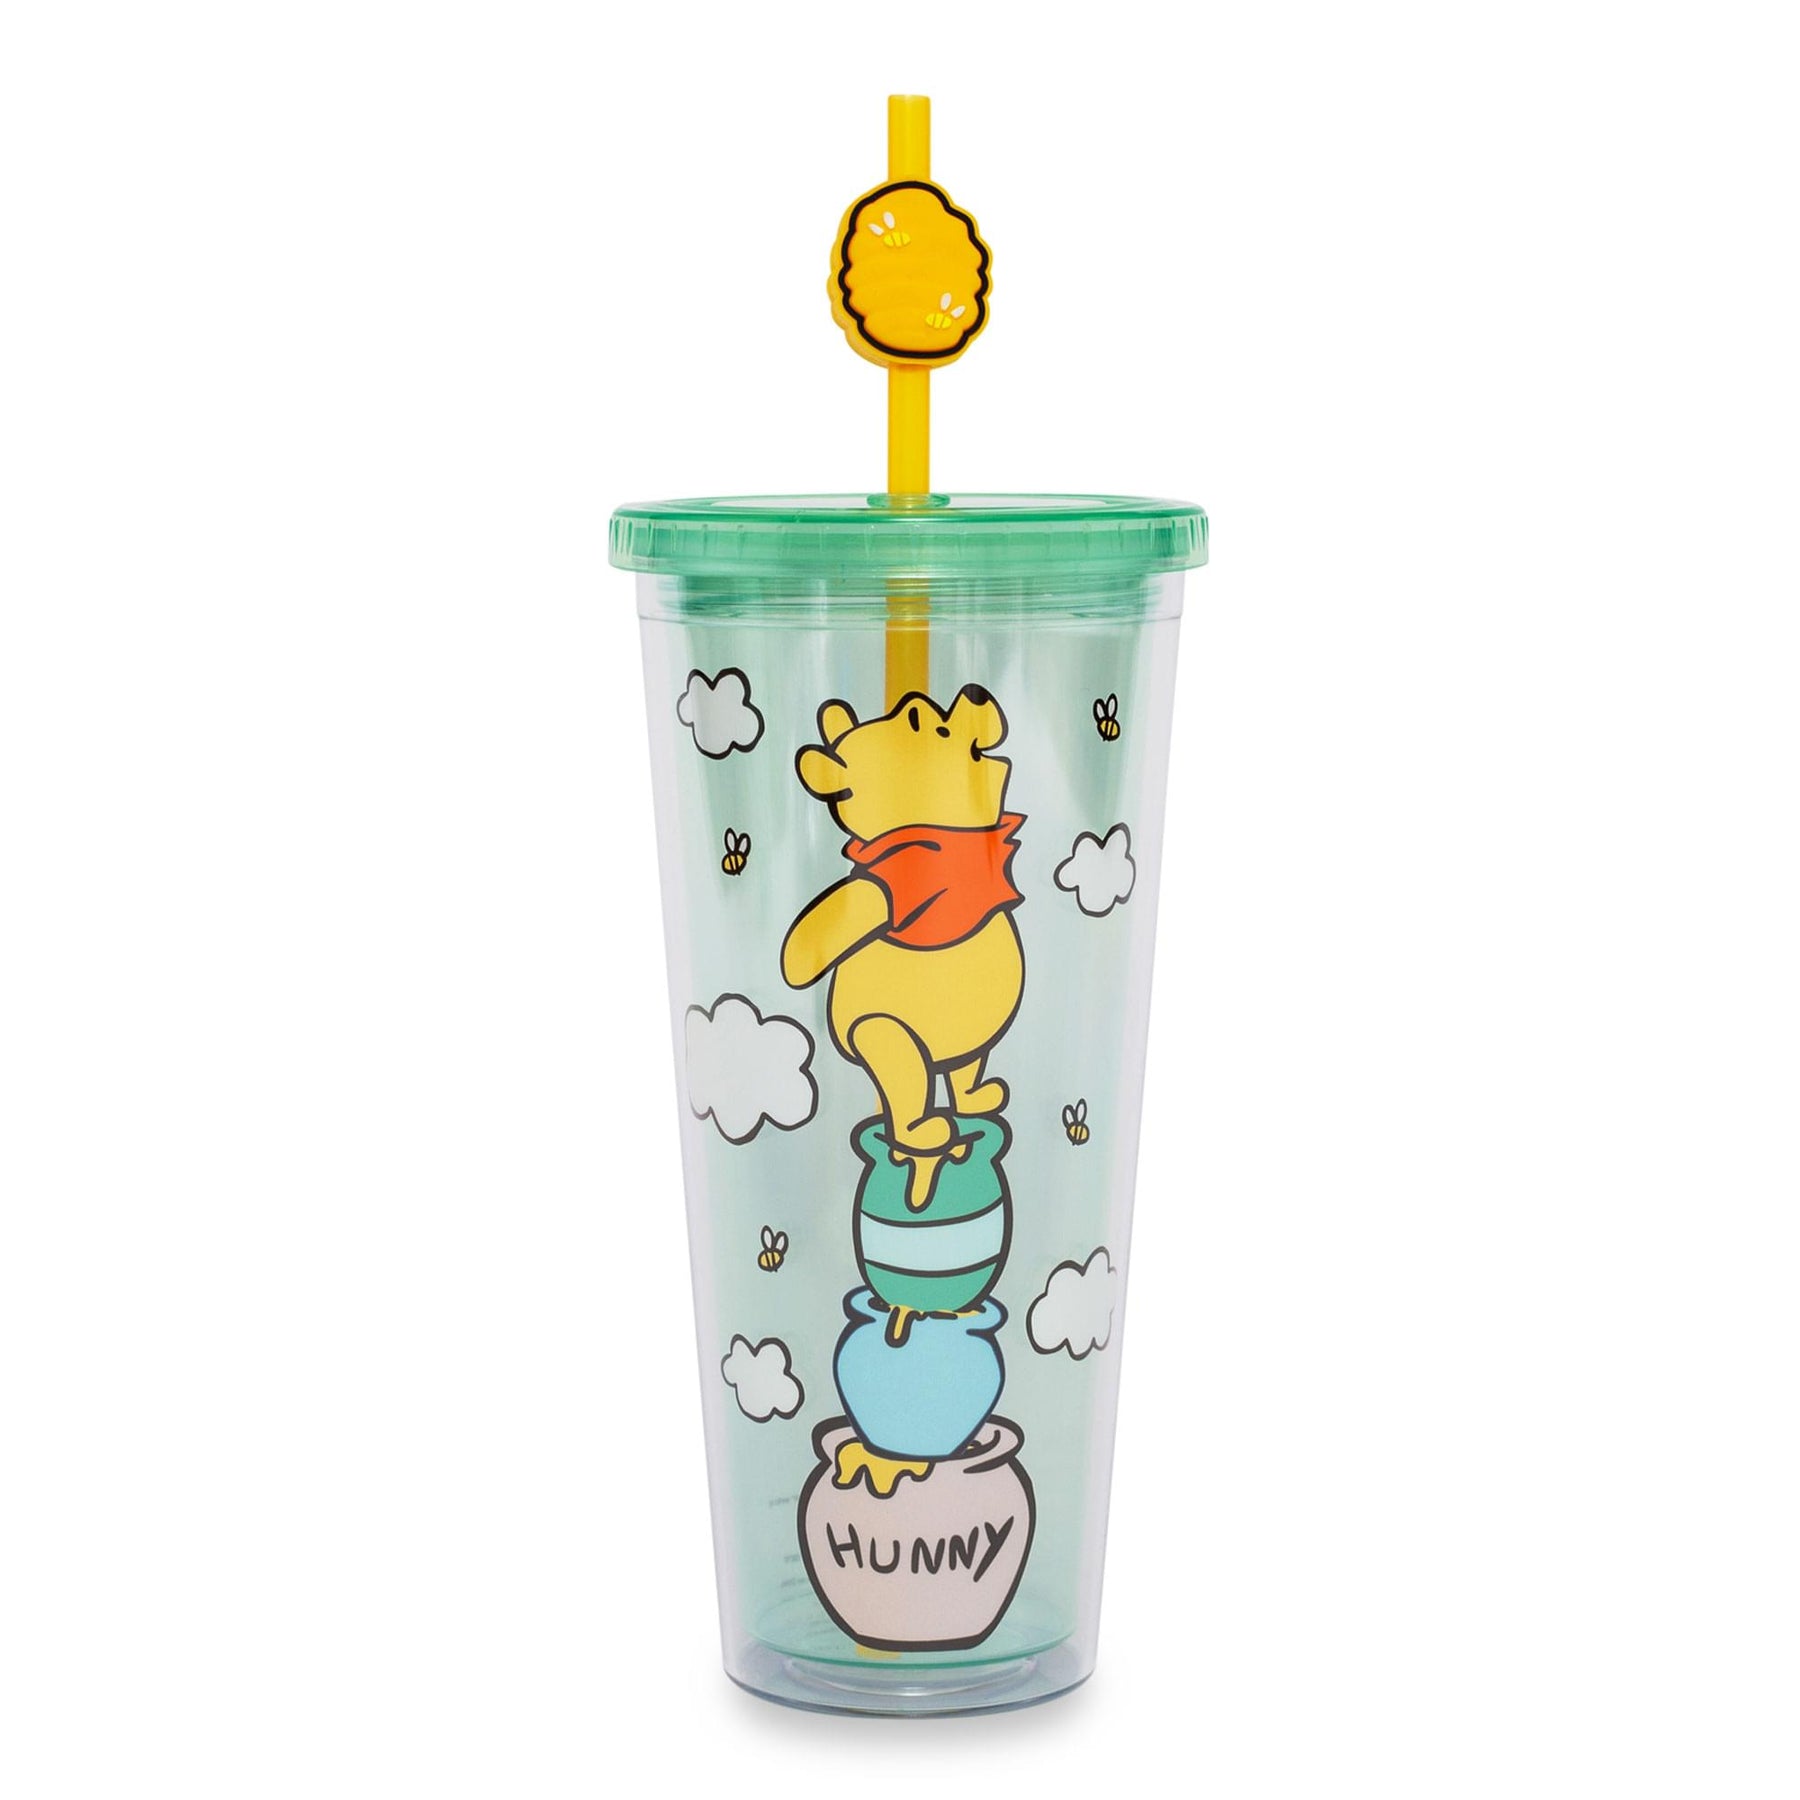 Disney Winnie the Pooh Hunny Pot Carnival Cup With Lid and Straw | Hold 24 Ounce